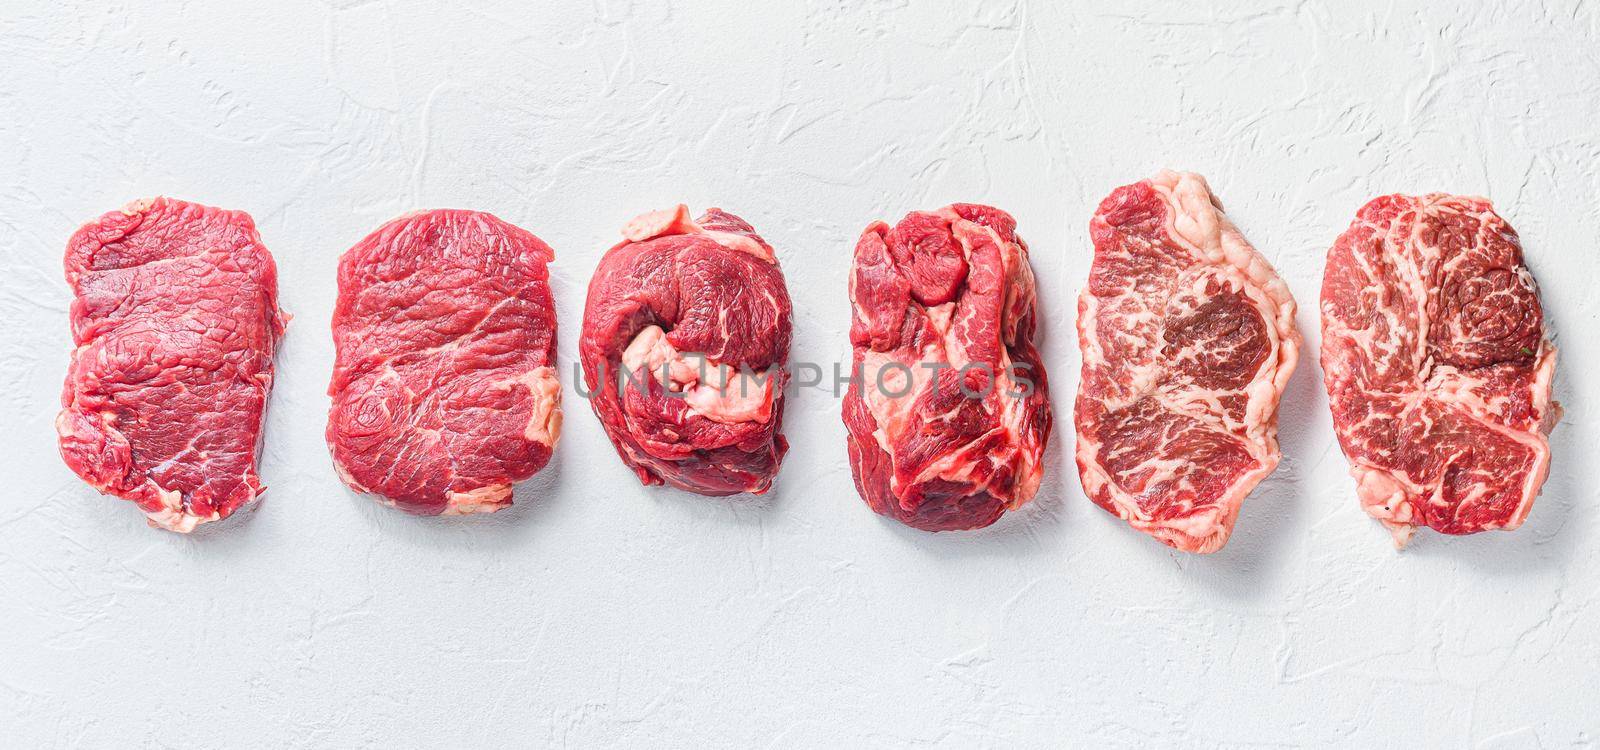 A set of different types of raw beef steaks:top blade, rump, chuck eye roll over white concrete background top view big size pano. by Ilianesolenyi